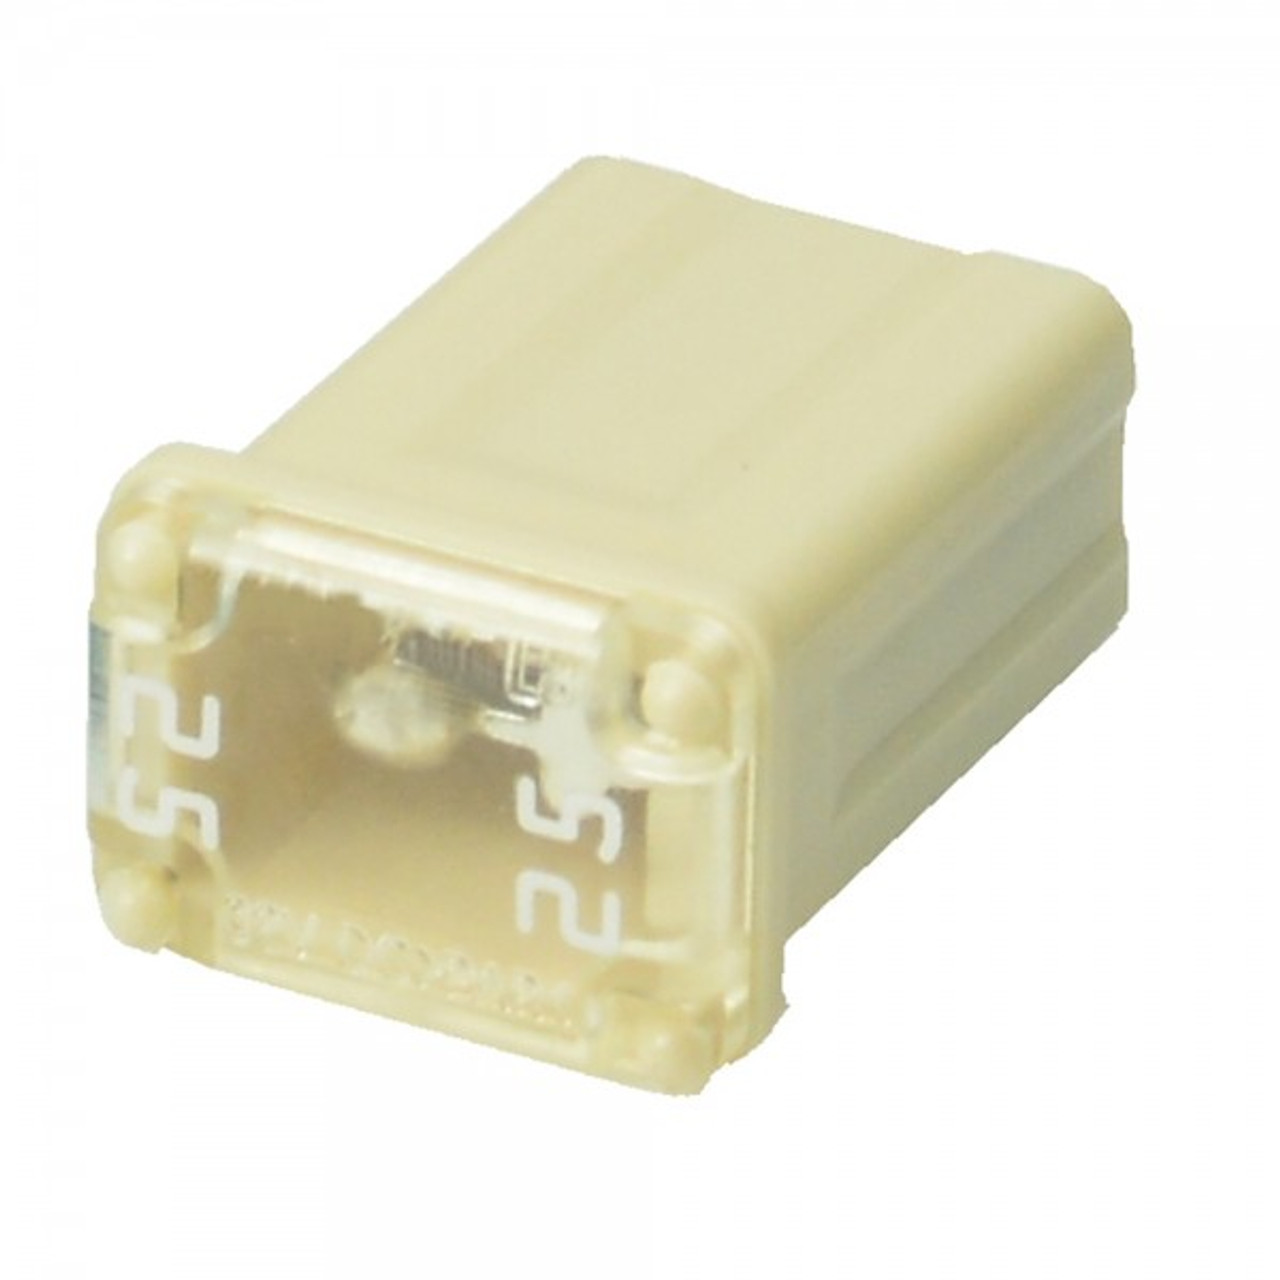 Fusible Links Micro Female Time Delay Fuse 25A 32V - White  82-FMX-M-25A